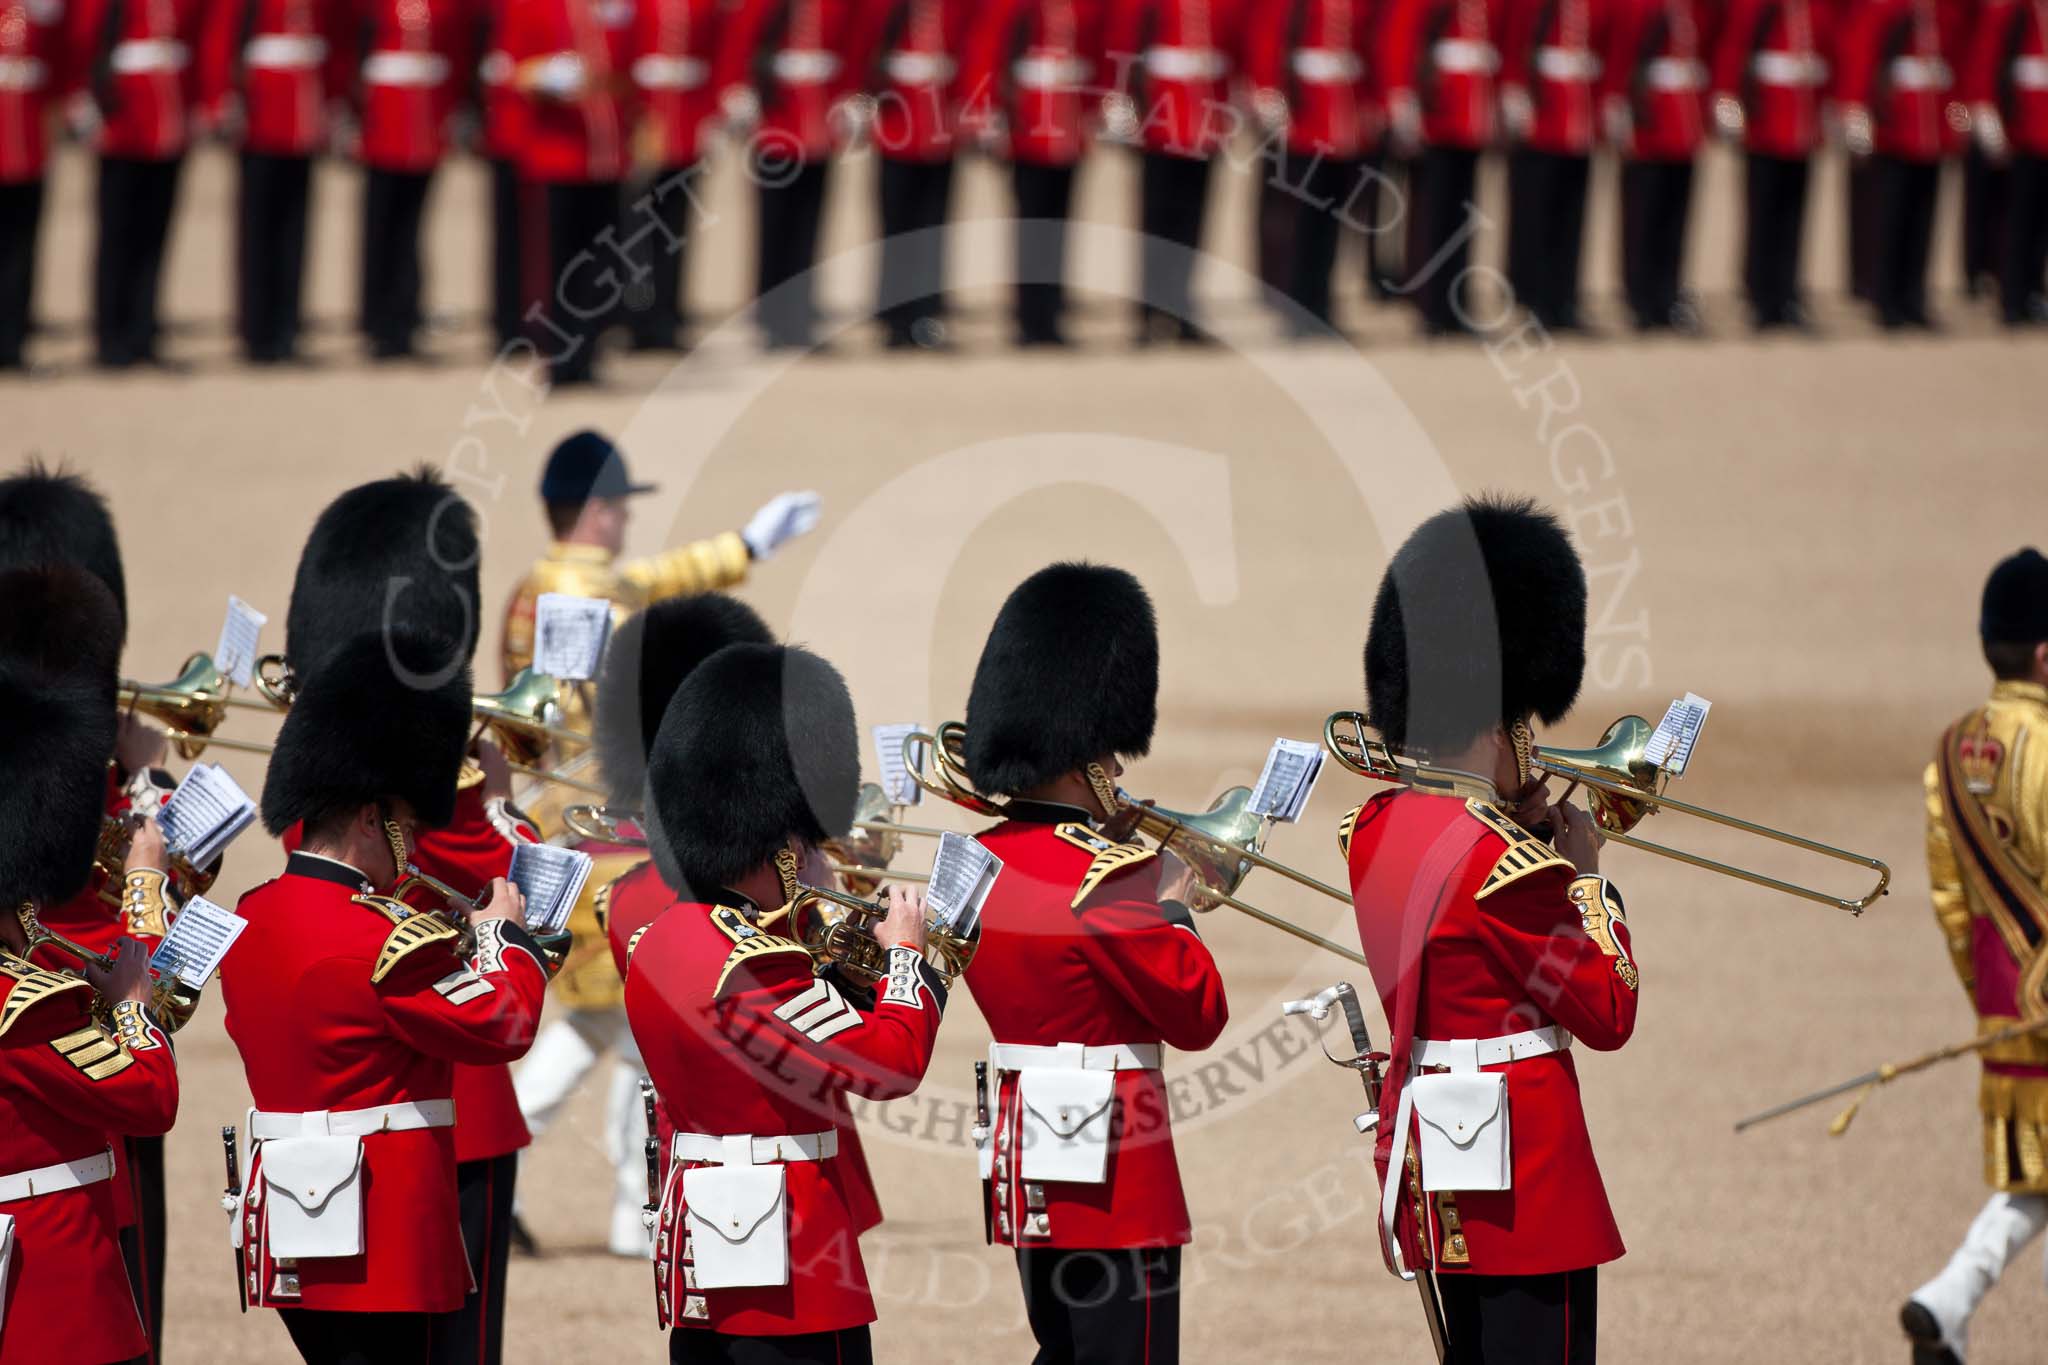 Trooping the Colour 2009: The band of the Grenadier Guards playing..
Horse Guards Parade, Westminster,
London SW1,

United Kingdom,
on 13 June 2009 at 11:10, image #166